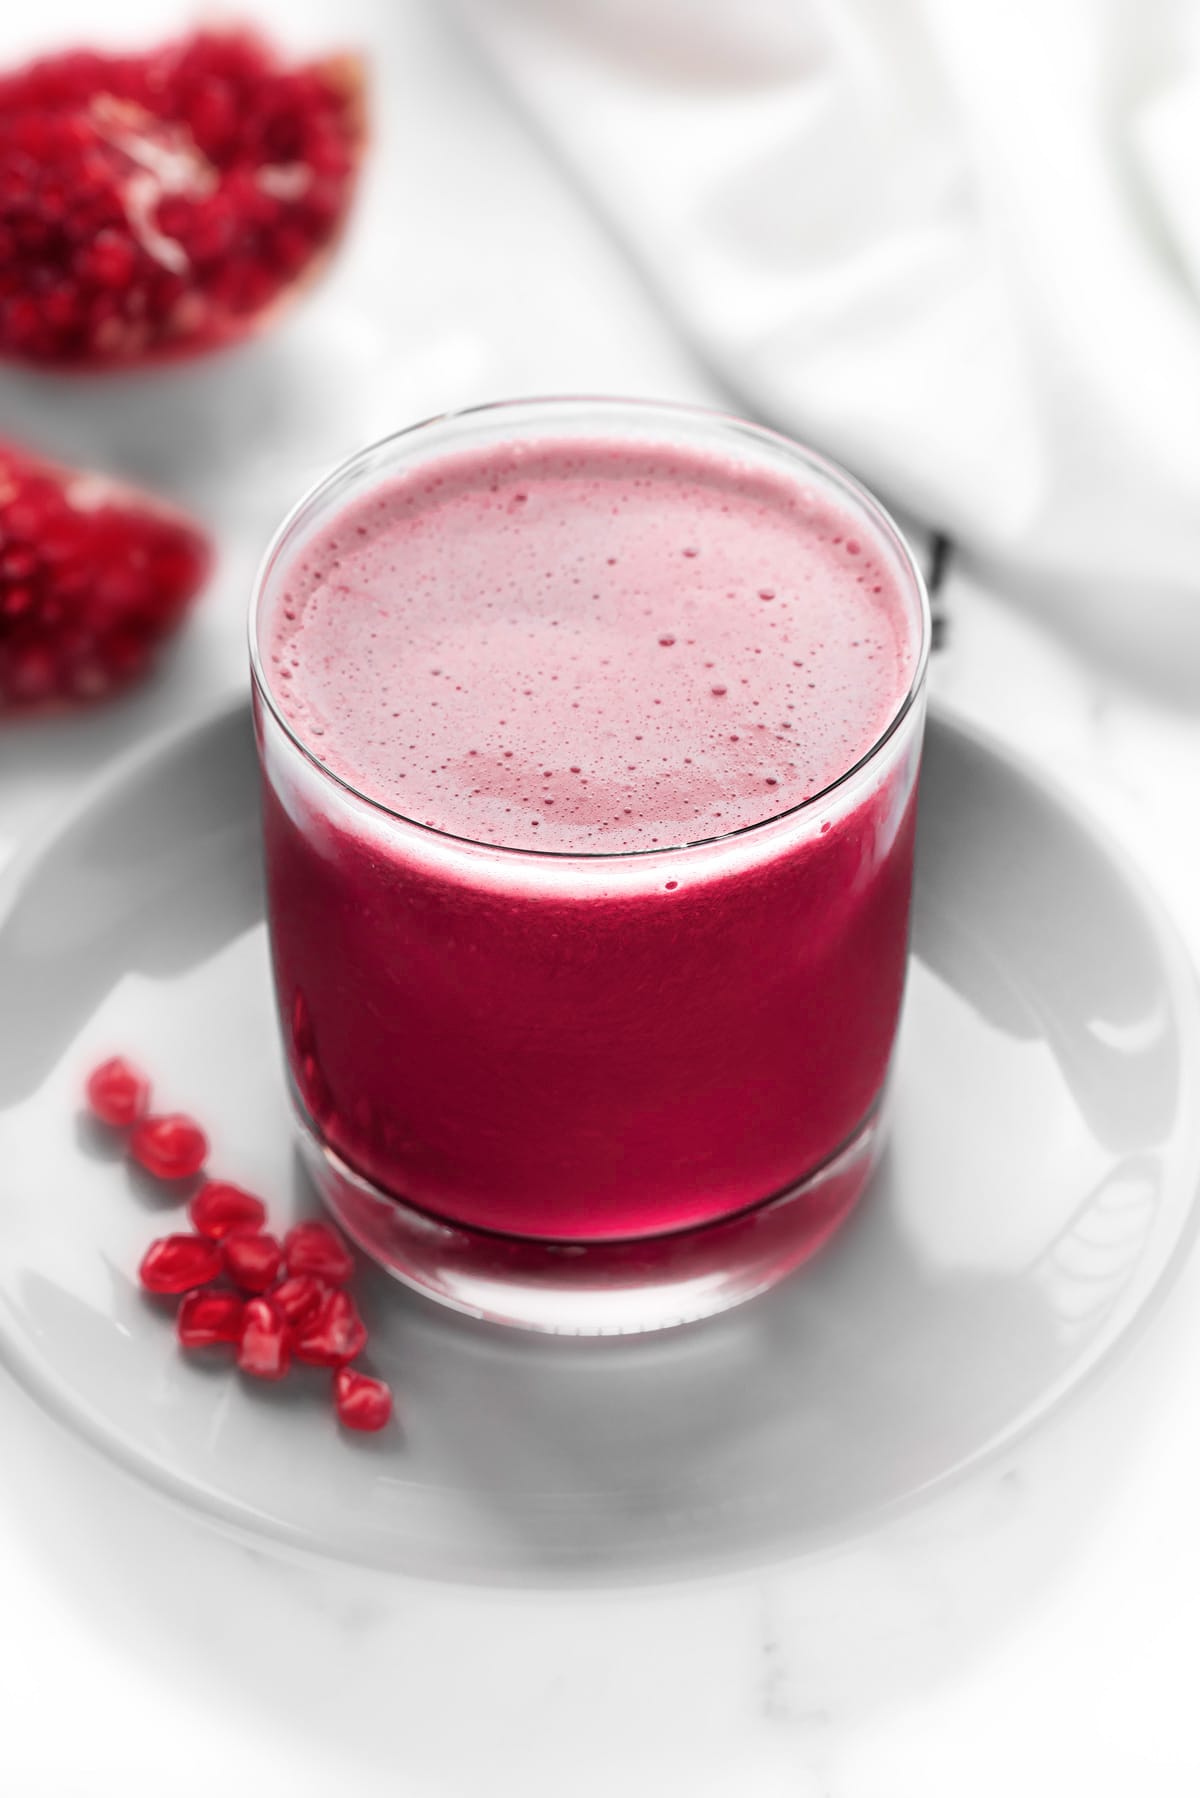 Homemade fresh Pomegranate juice served in glass, few arils spread around and at the back.